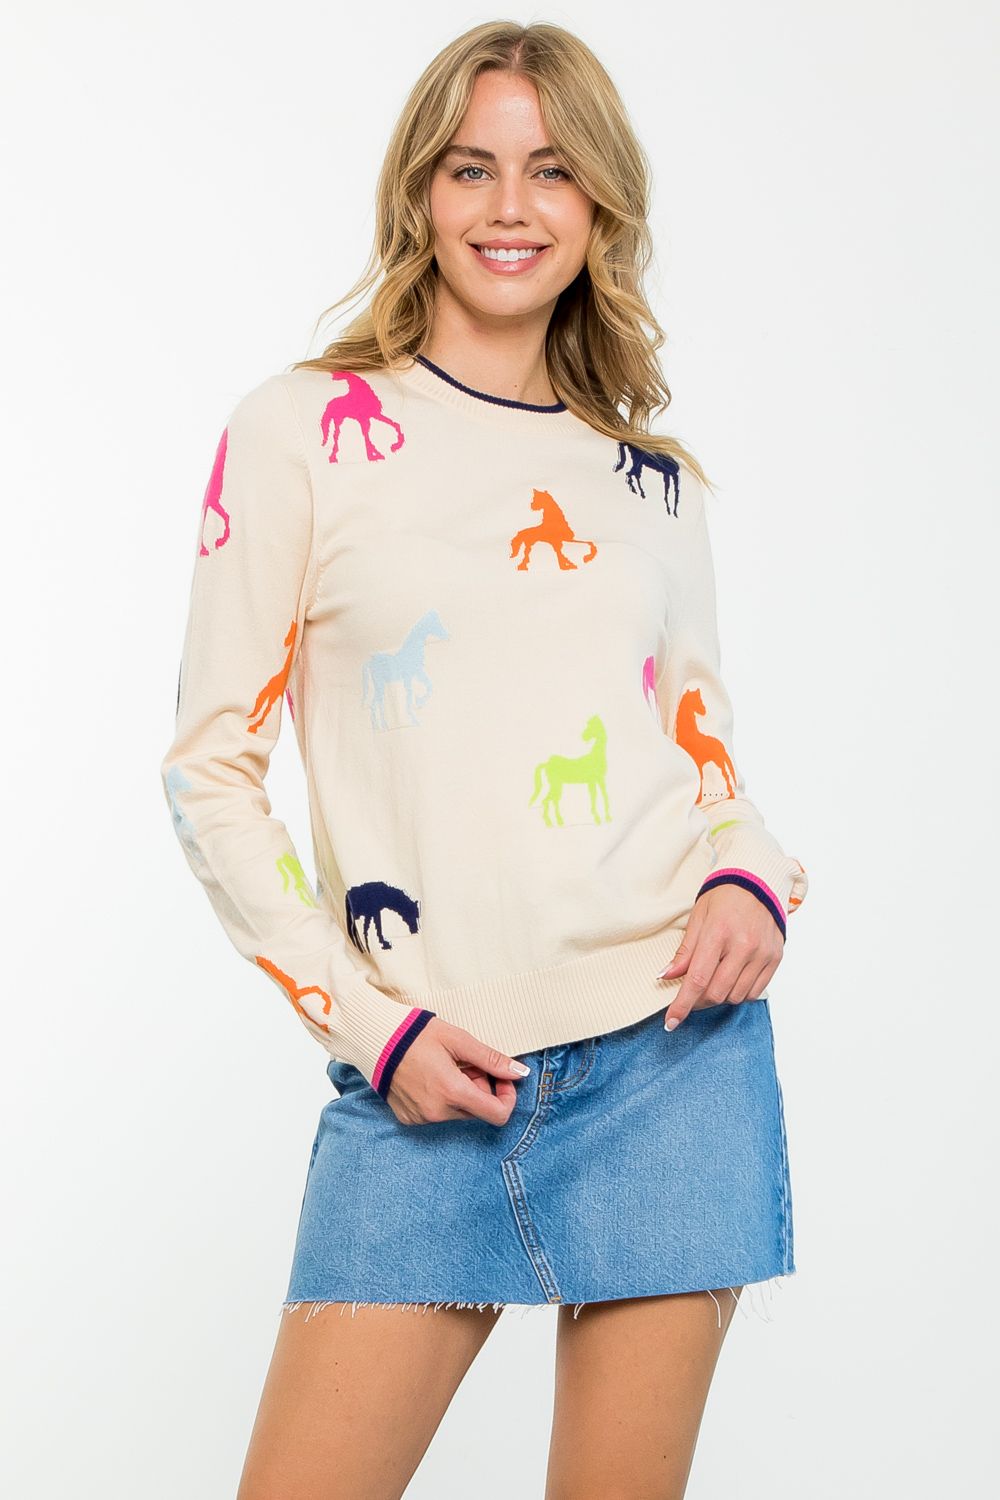 Pony up! Cream Sweater with Multi Color Horses